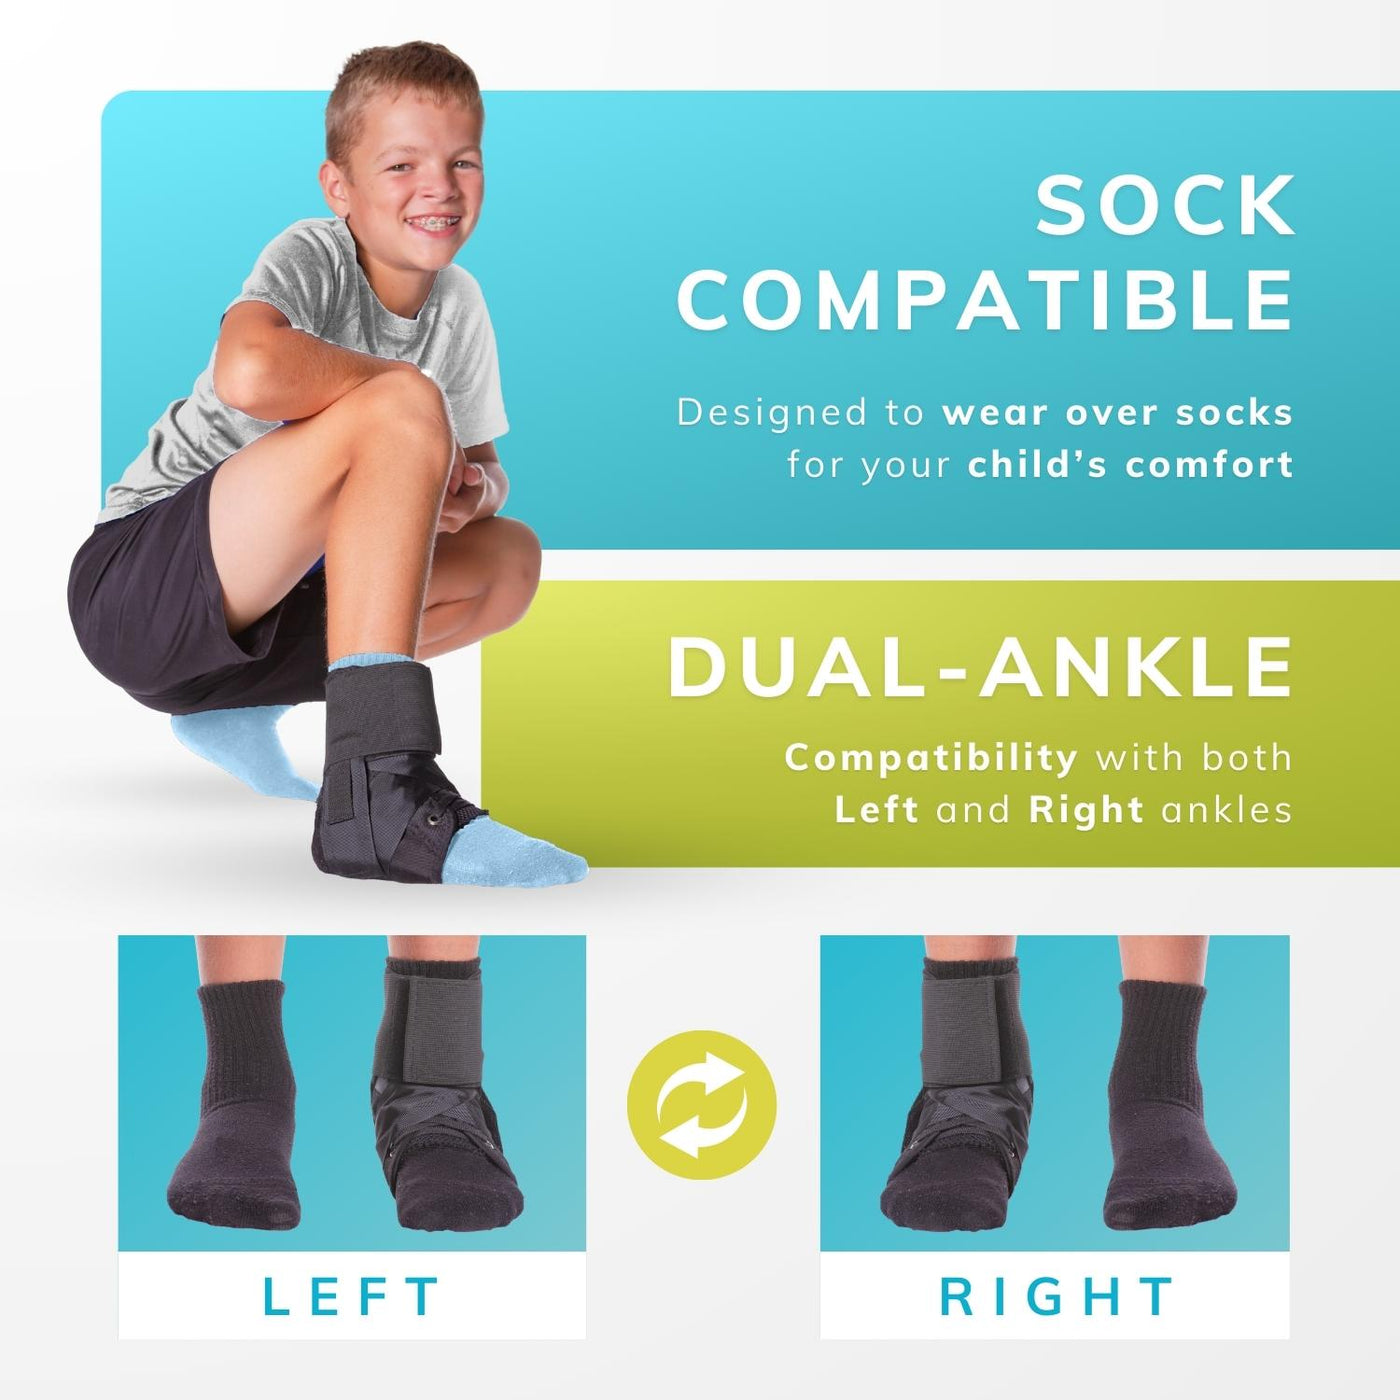 The childrens ankle brace for gymnastics can be worn on their left or right foot under or over socks